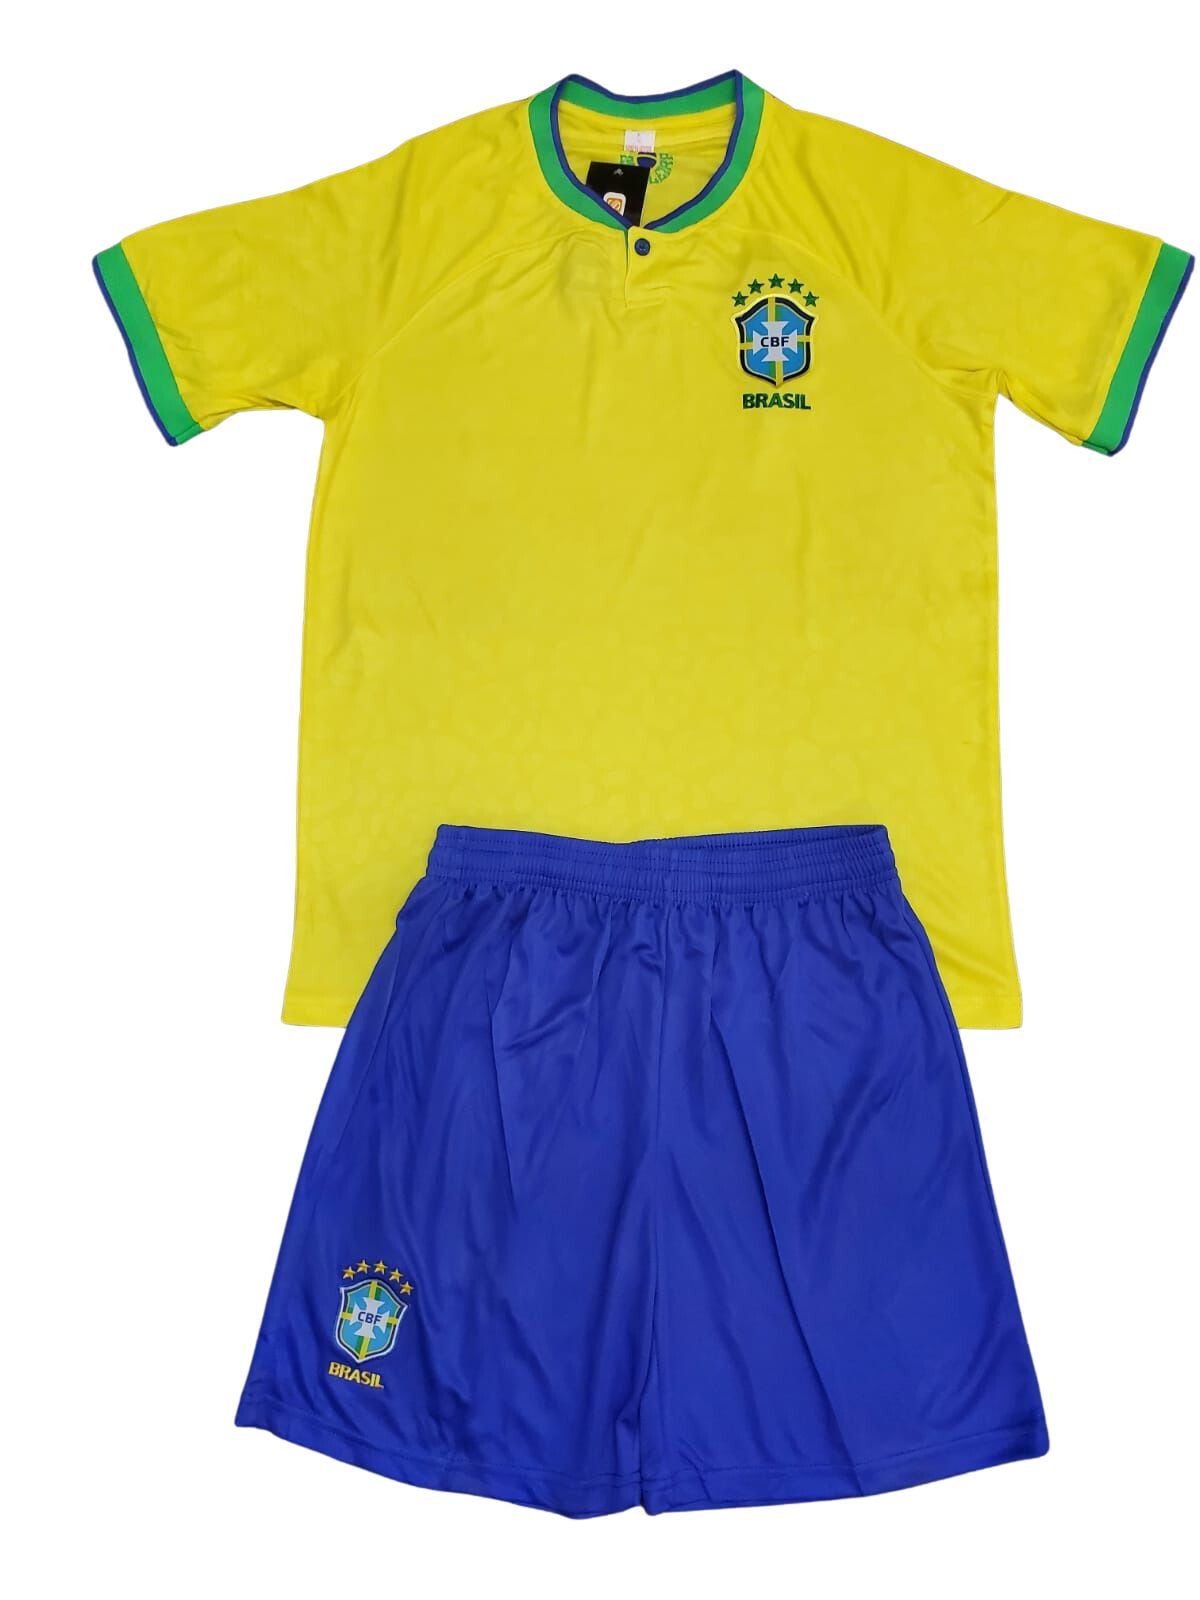 G&S Brazil Home Soccer Kid Set- Jersey and Short- Youth Small (8